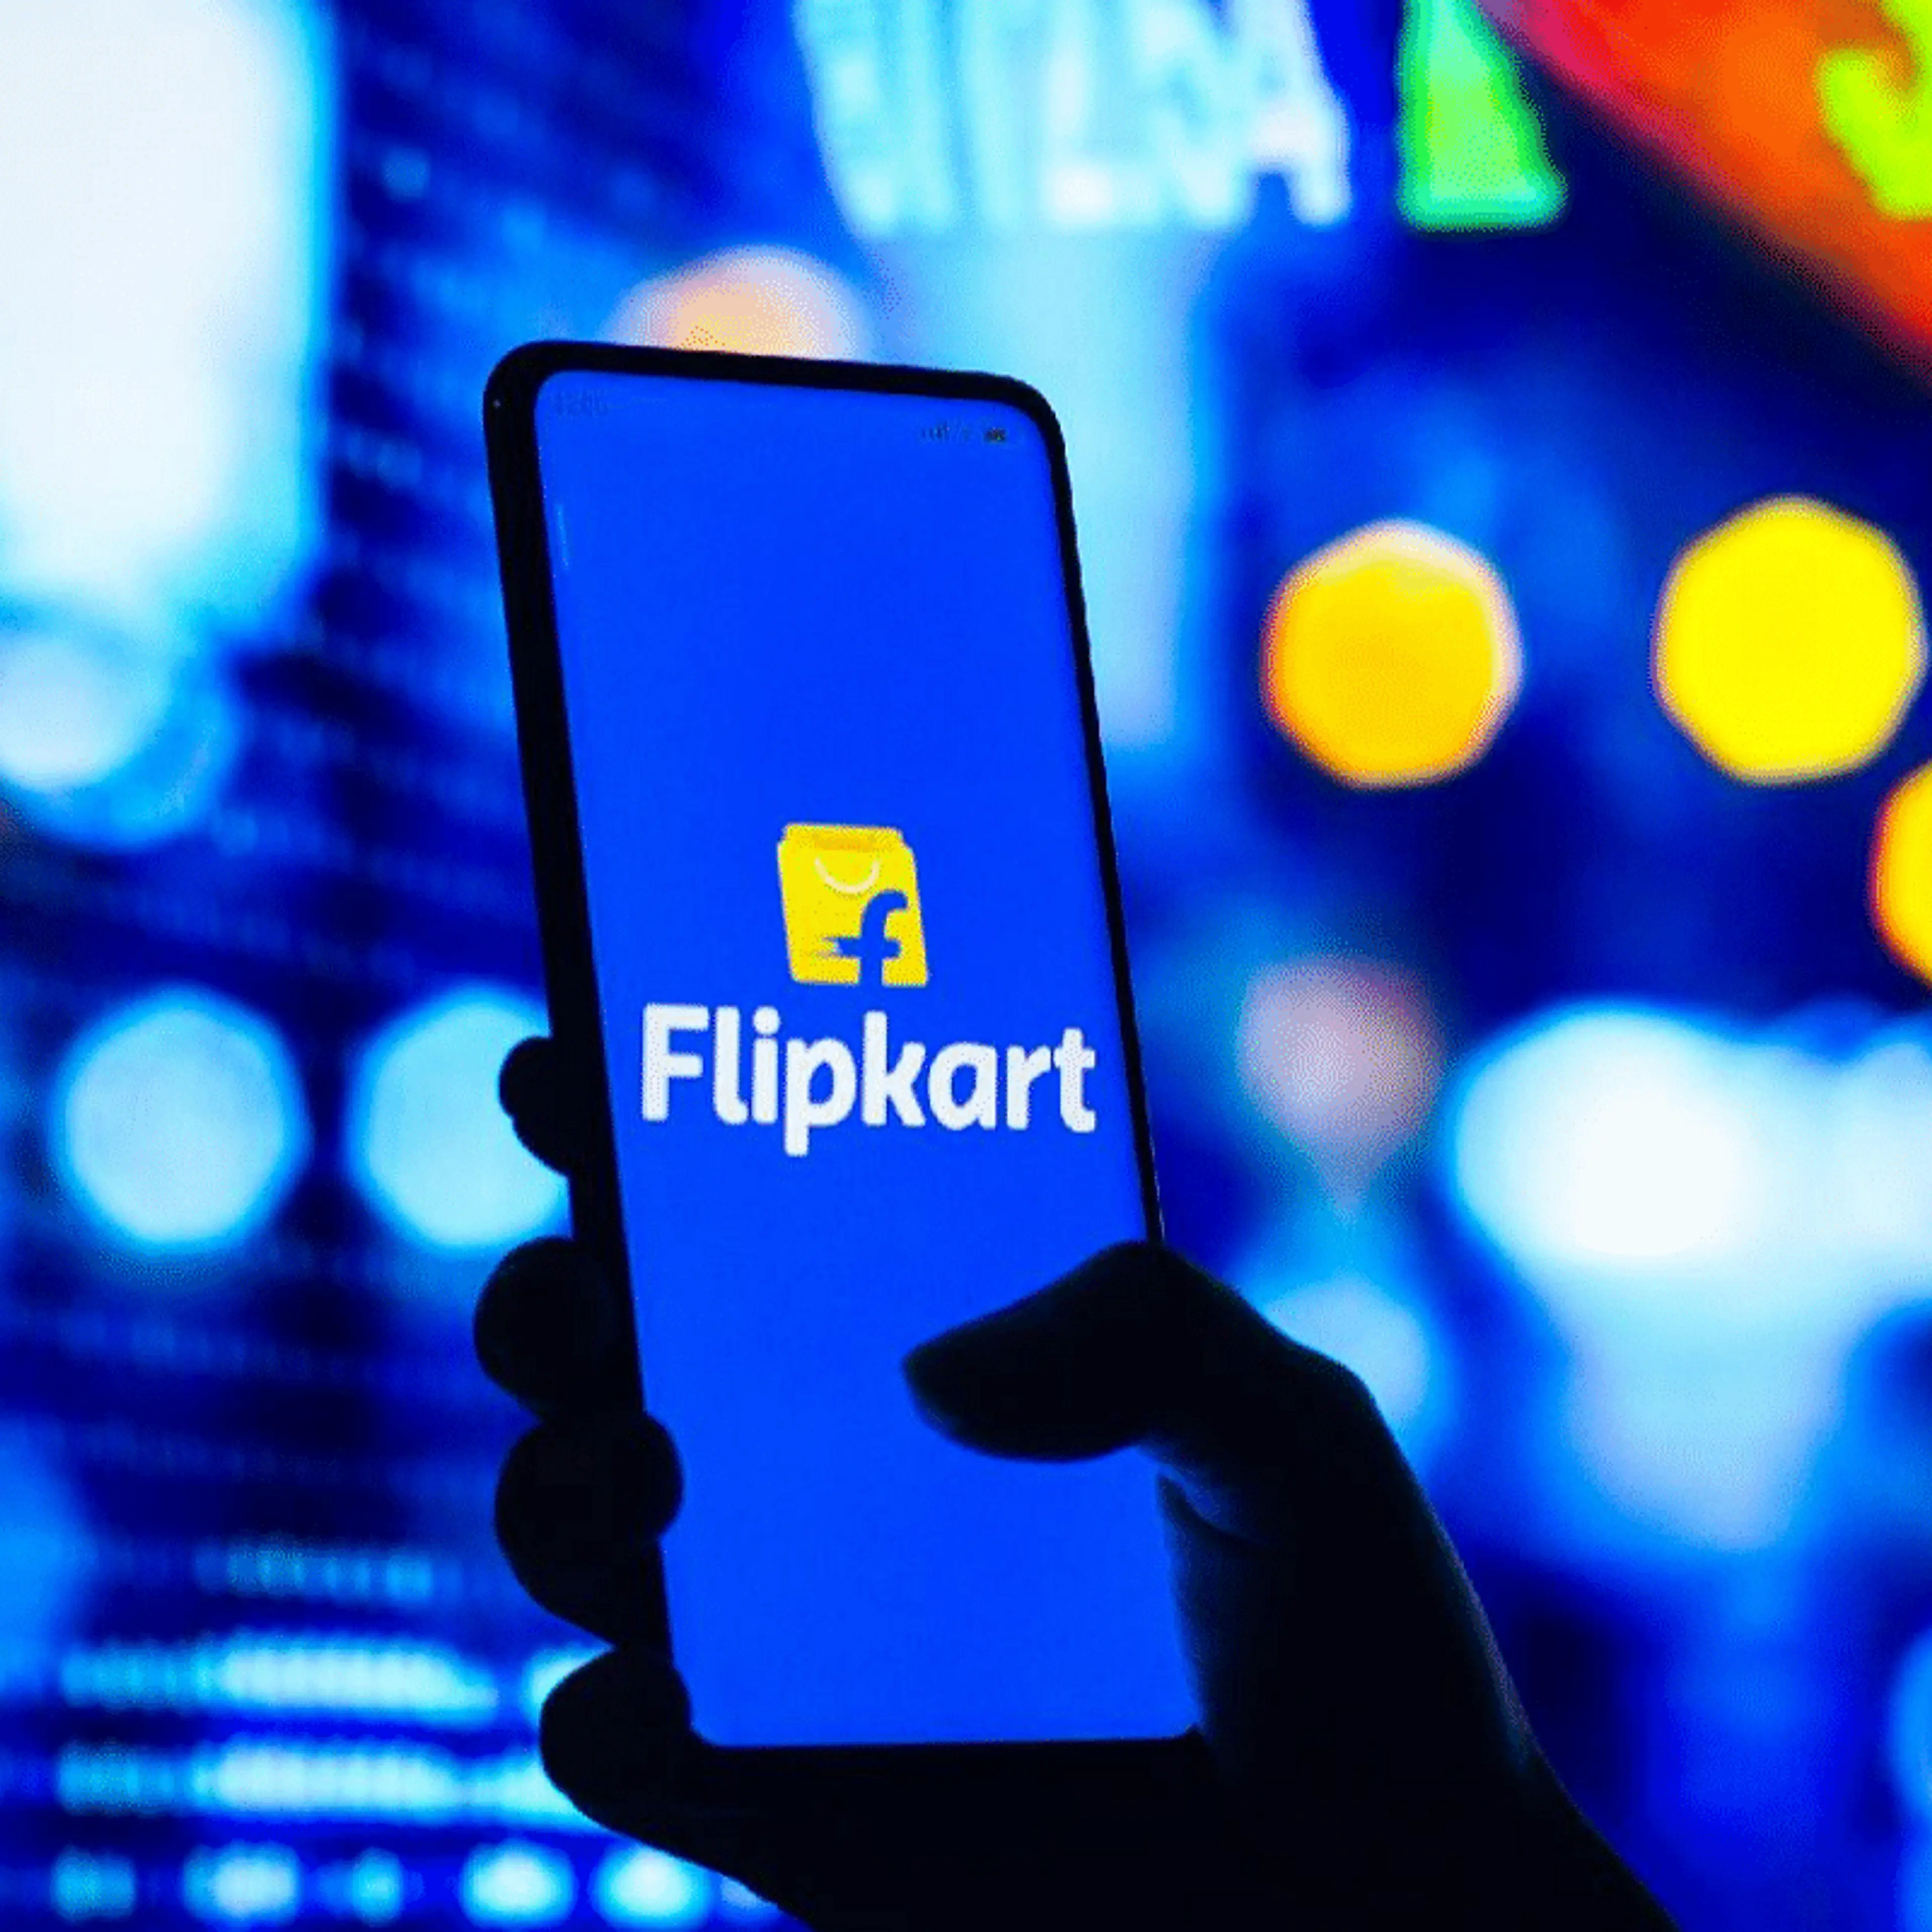 Indians spent over 2M hours on Flipkart’s video commerce offering in the past year